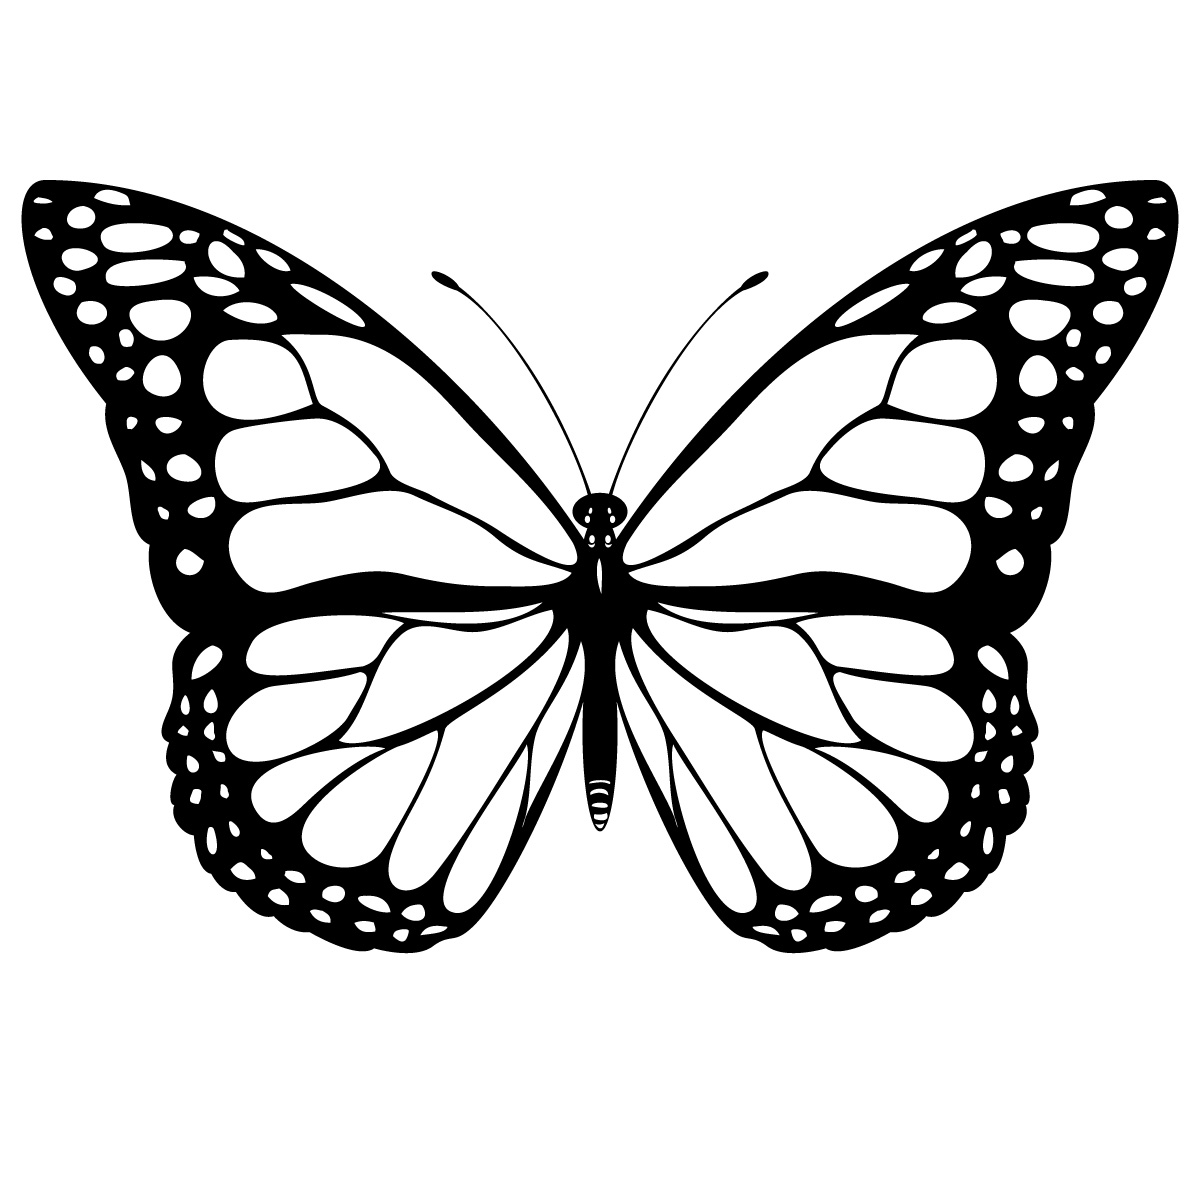 This Drawing Of A Butterfly Is Also An Icon As It Physically Resembles